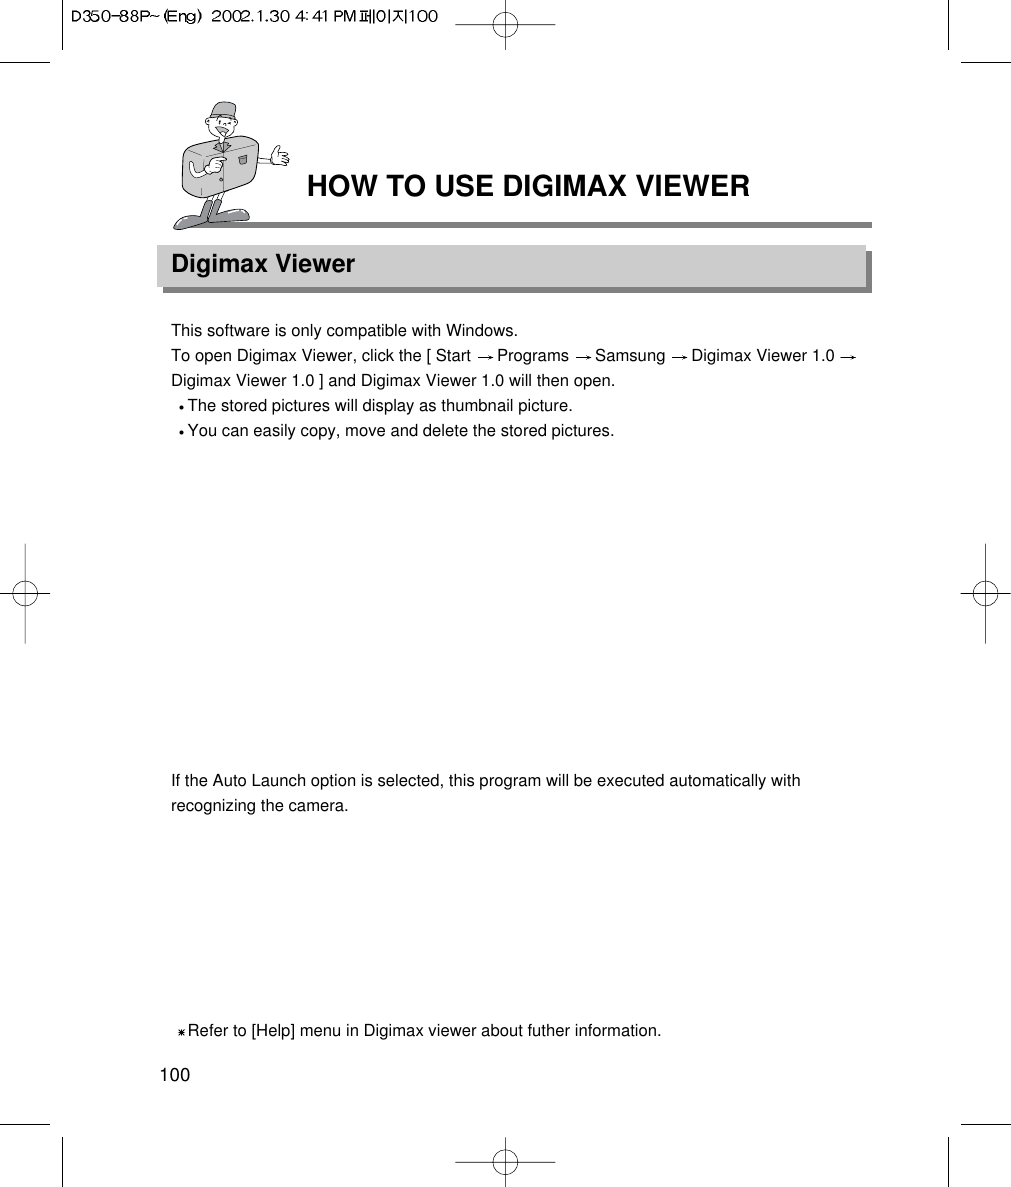 HOW TO USE DIGIMAX VIEWERDigimax Viewer100This software is only compatible with Windows.To open Digimax Viewer, click the [ Start  Programs  Samsung  Digimax Viewer 1.0 Digimax Viewer 1.0 ] and Digimax Viewer 1.0 will then open.The stored pictures will display as thumbnail picture.You can easily copy, move and delete the stored pictures.If the Auto Launch option is selected, this program will be executed automatically withrecognizing the camera.Refer to [Help] menu in Digimax viewer about futher information.